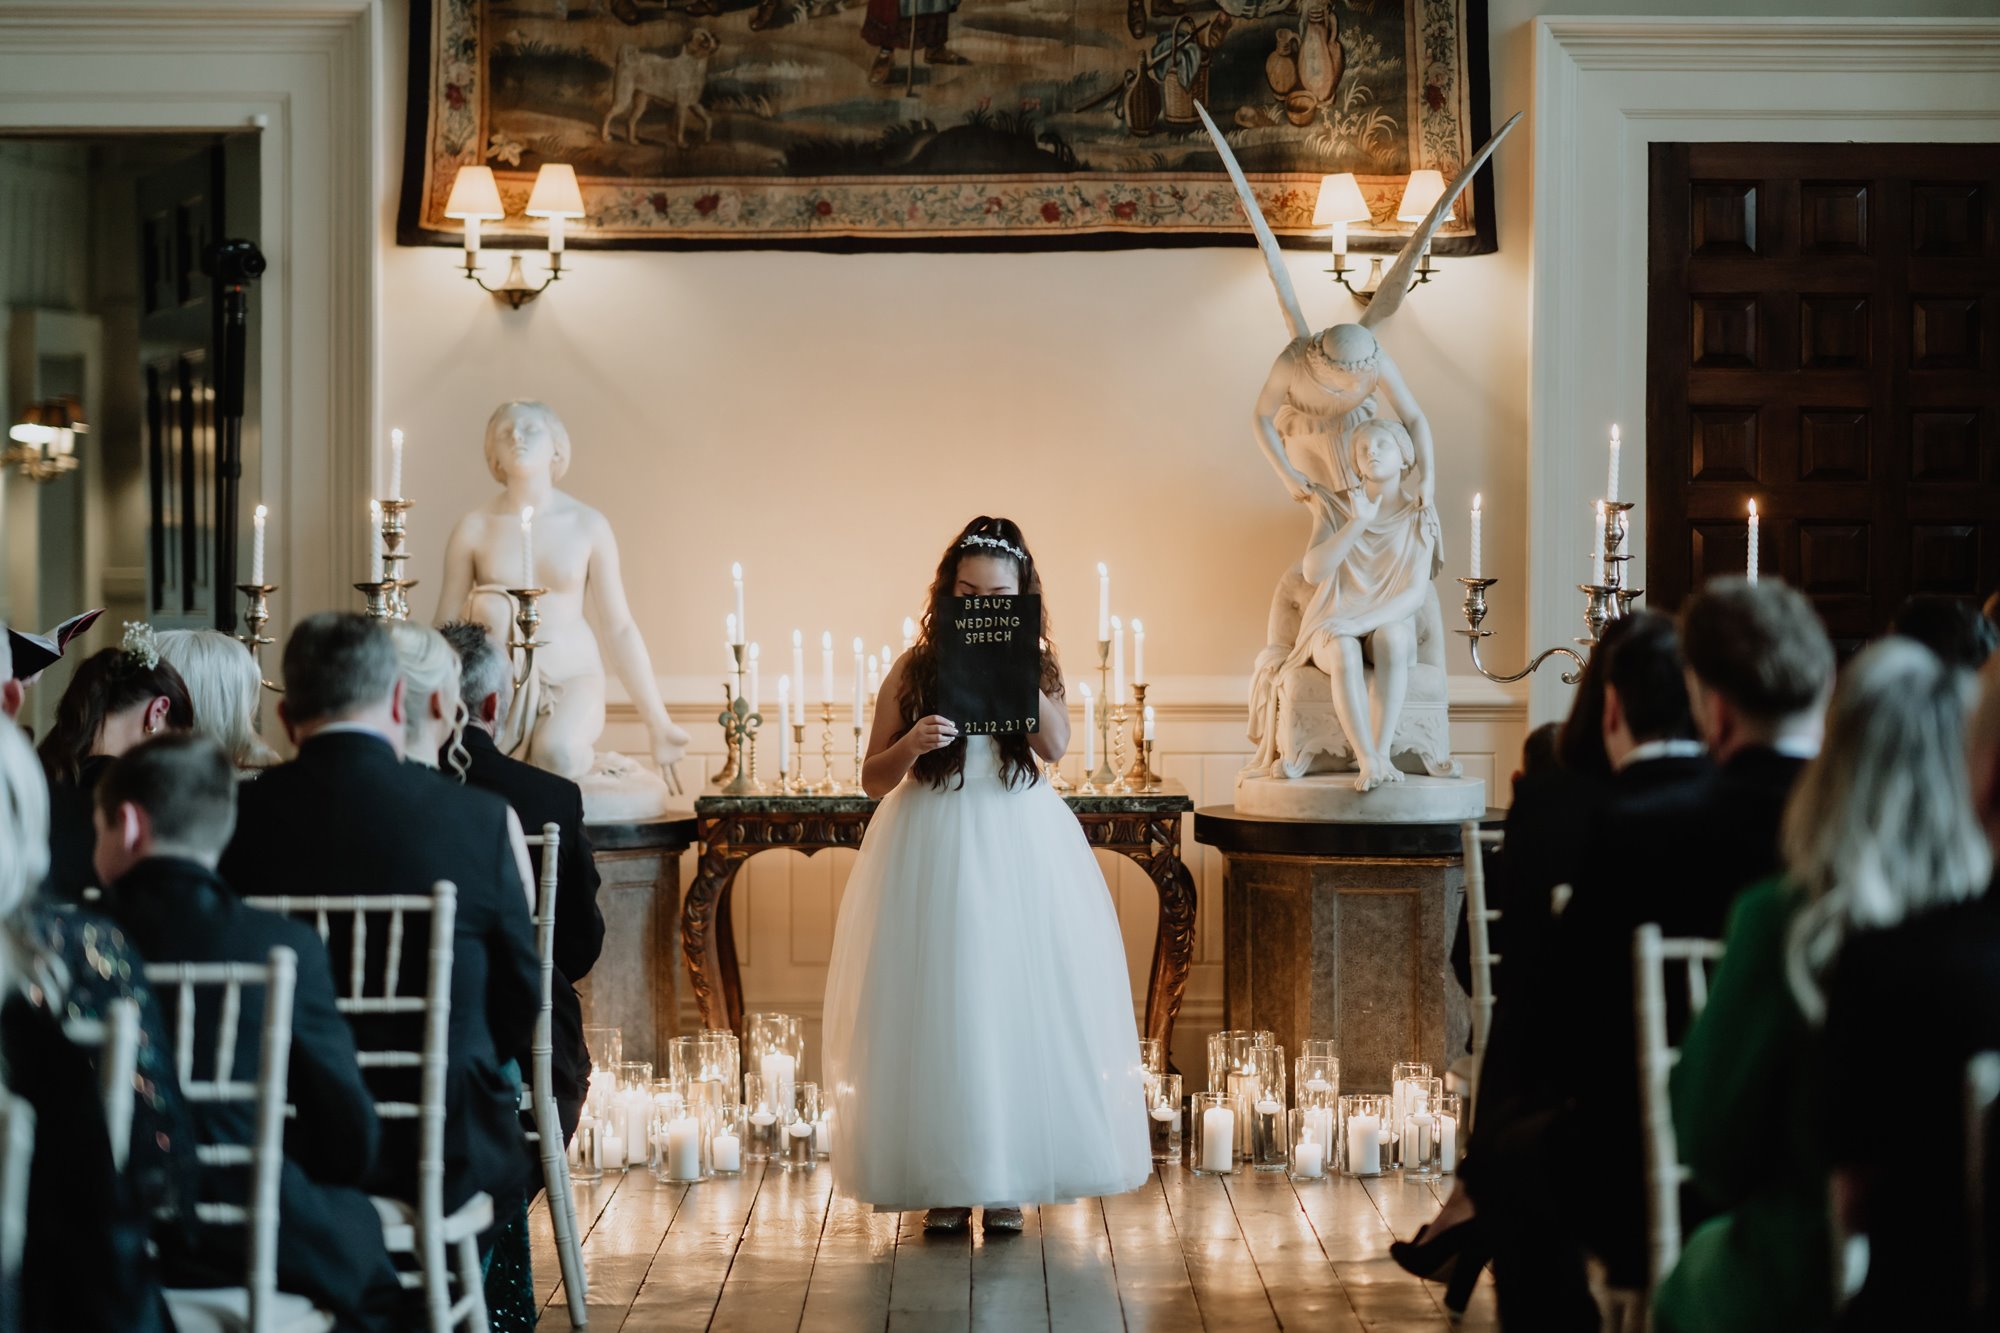 Flower girl posing at the end of the aisle with a stunning display of candles and sculptures behind her